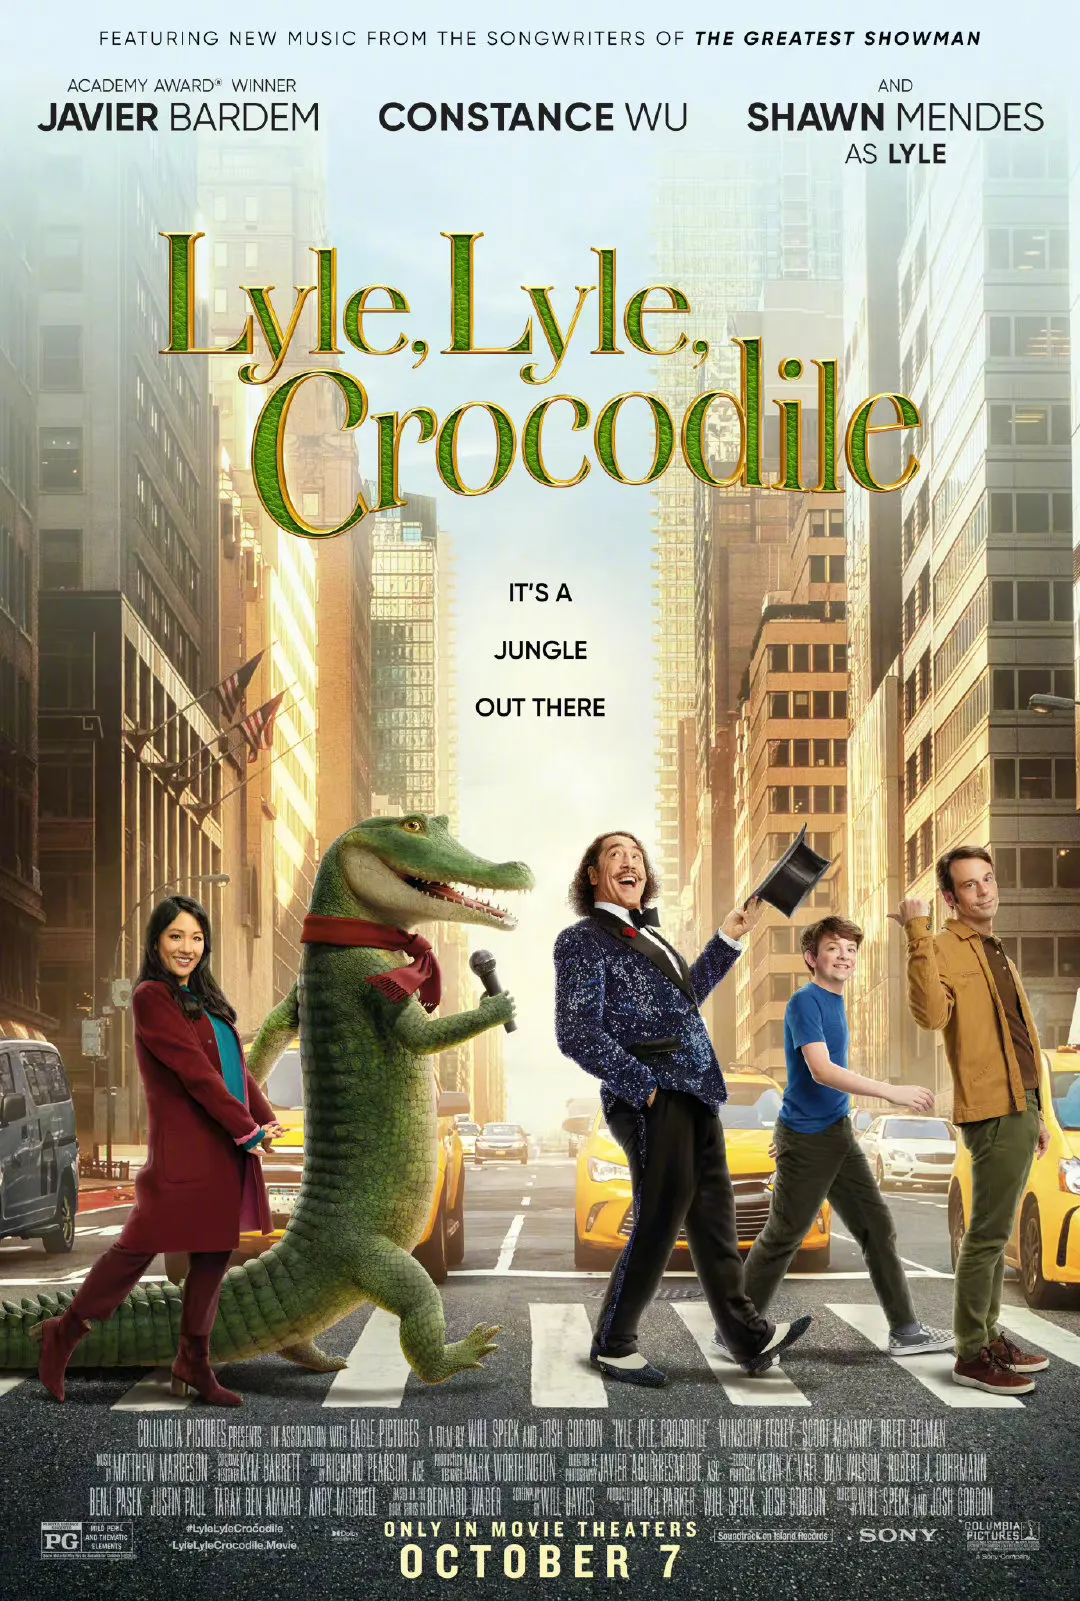 'Lyle, Lyle, Crocodile‎' Releases New Movie Posters | FMV6